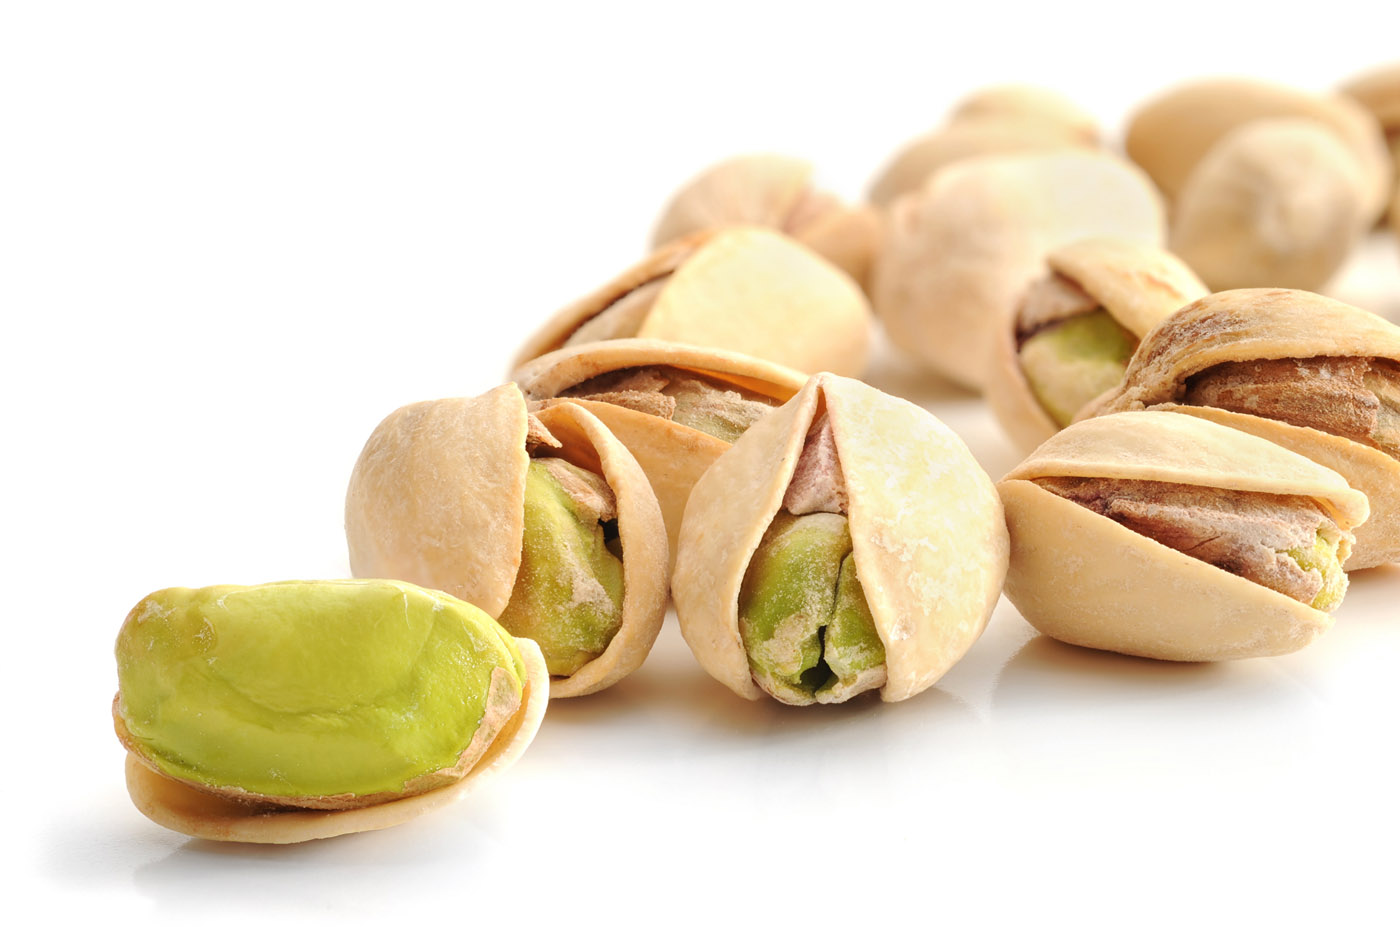 Sale price of pistachios and pistachio kernels in India